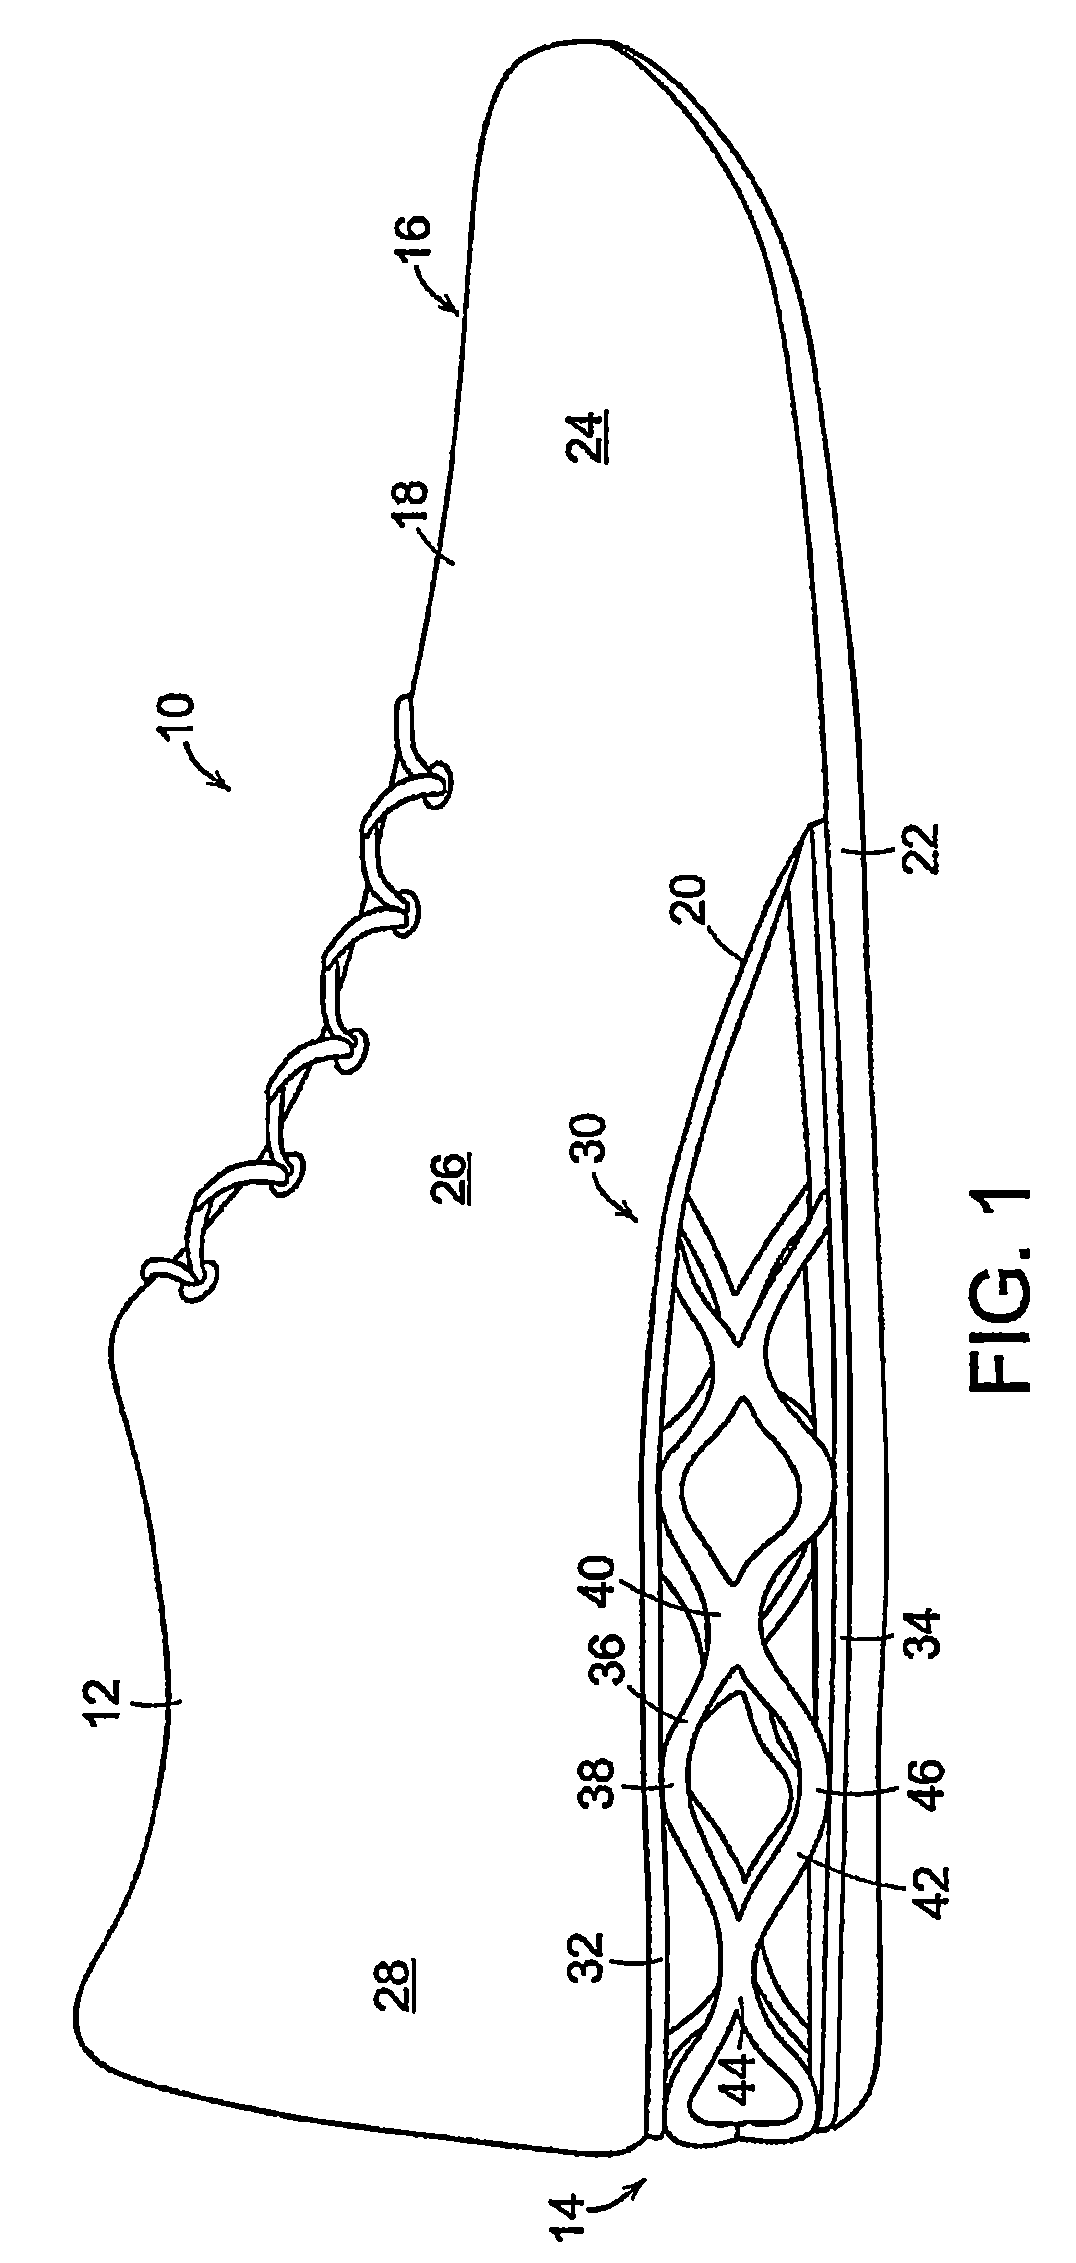 Article of footwear with multi-layered support assembly